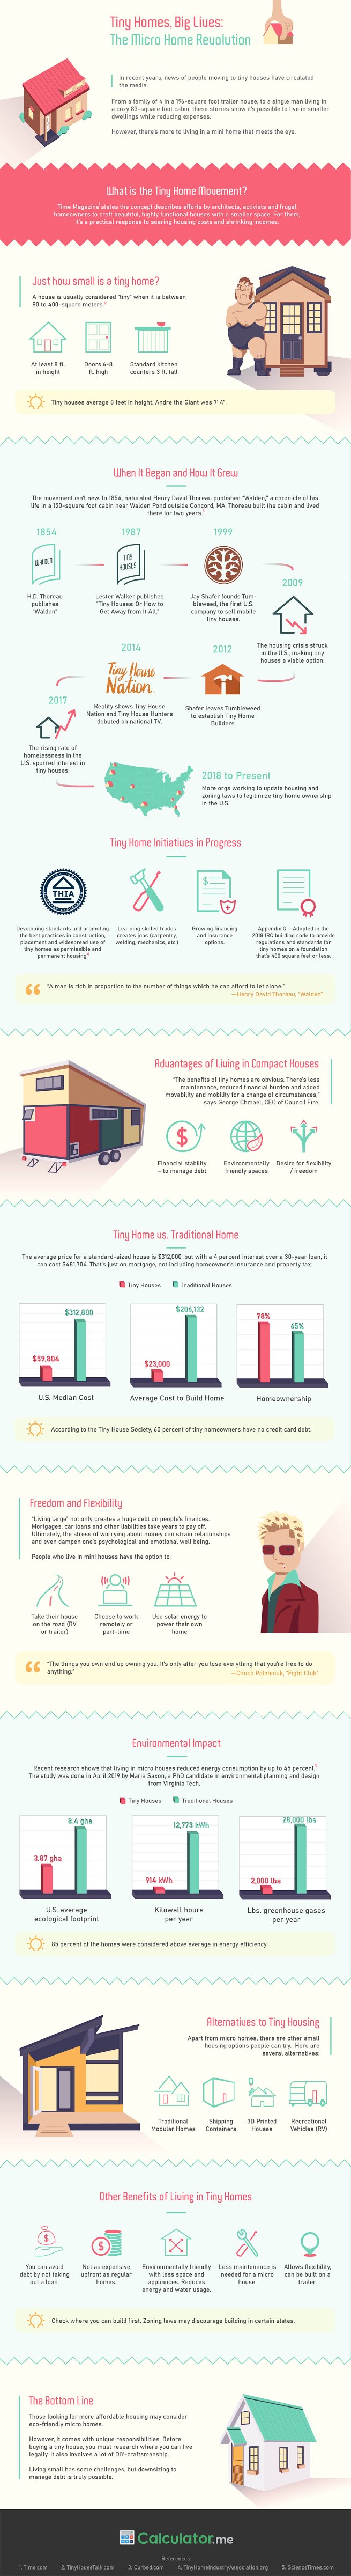 A Guide to Understanding the Tiny Homes Movement #infographic